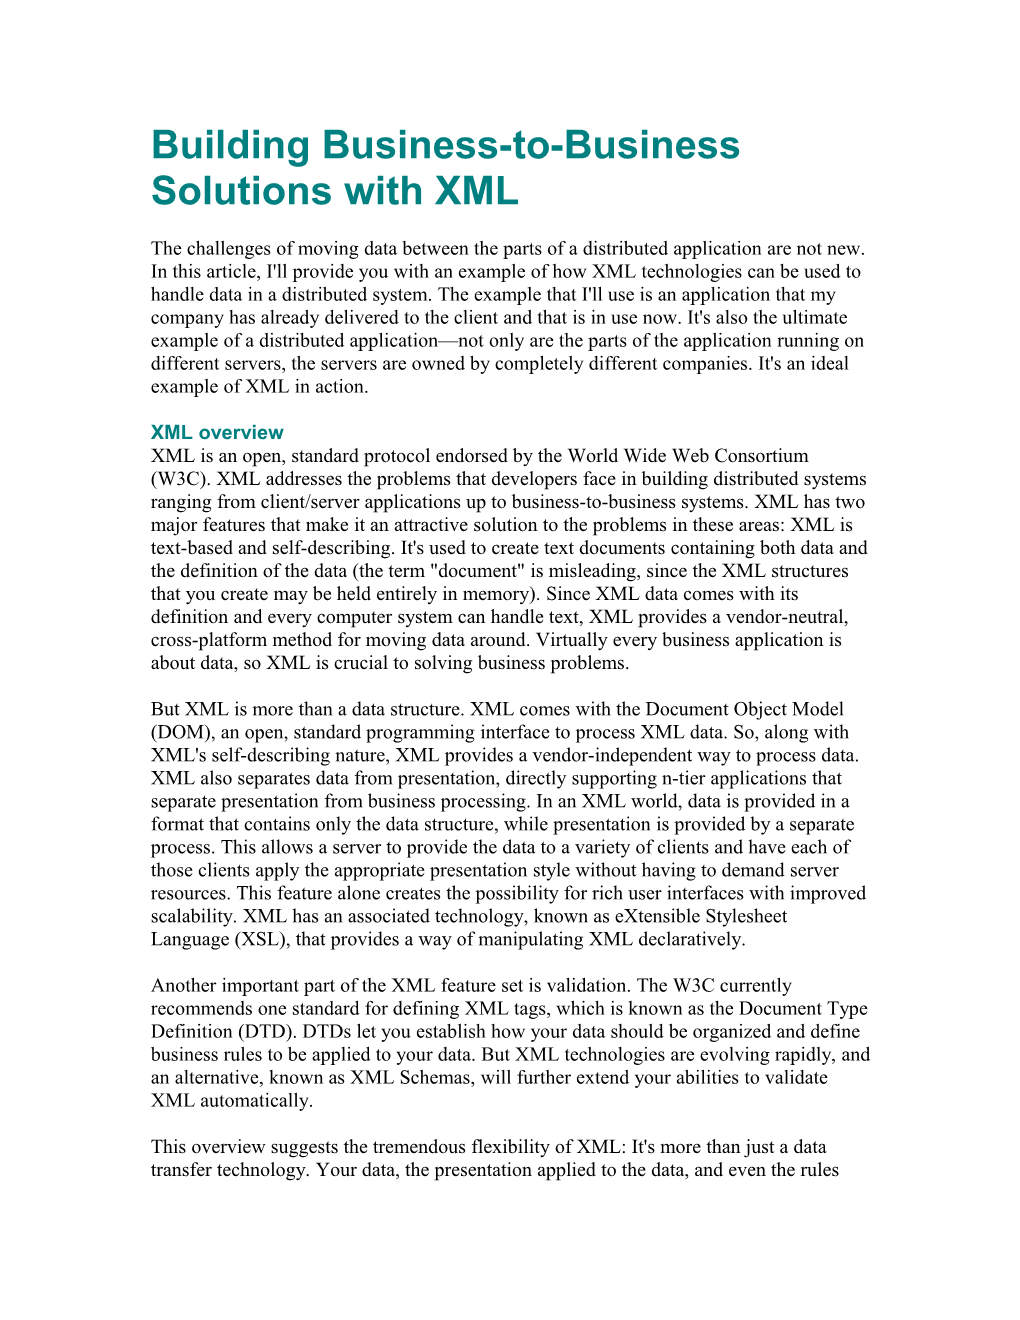 Building Business-To-Business Solutions with XML